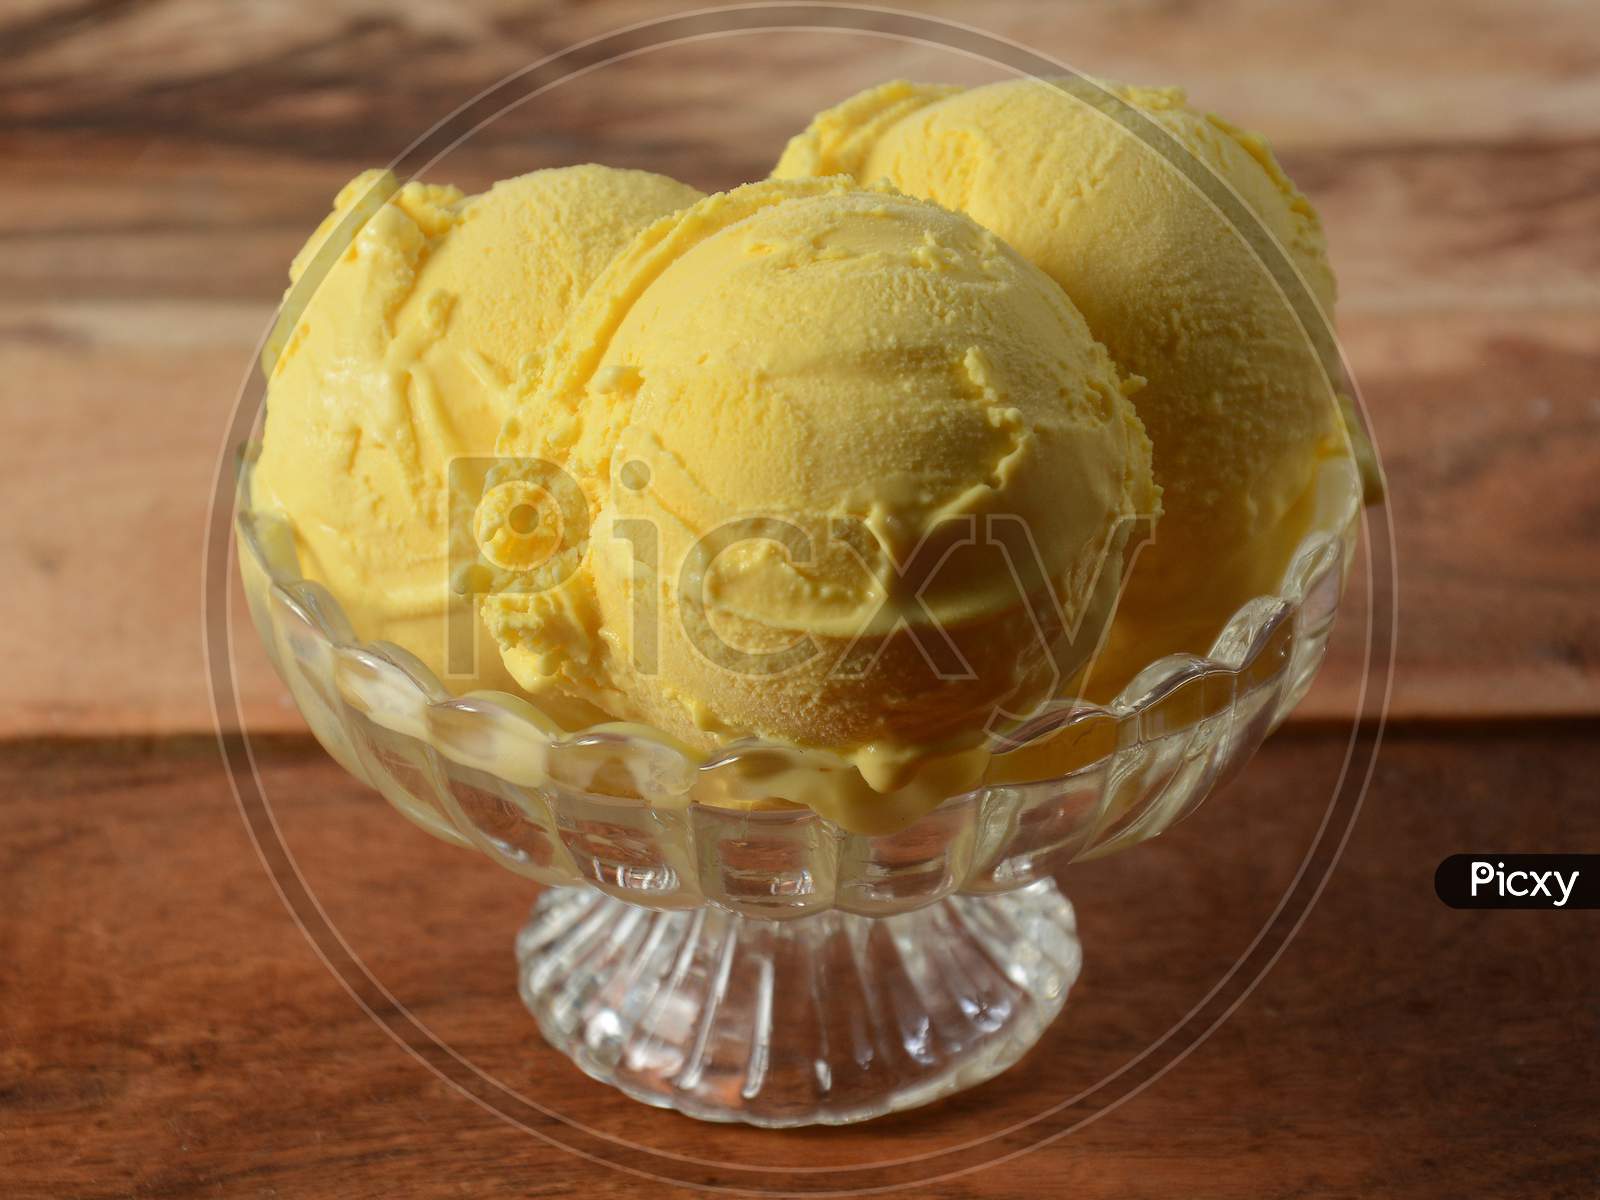 Mango Ice Cream Scoops Served In A Glass Bowl Over A Rustic Wooden Table, Selective Focus